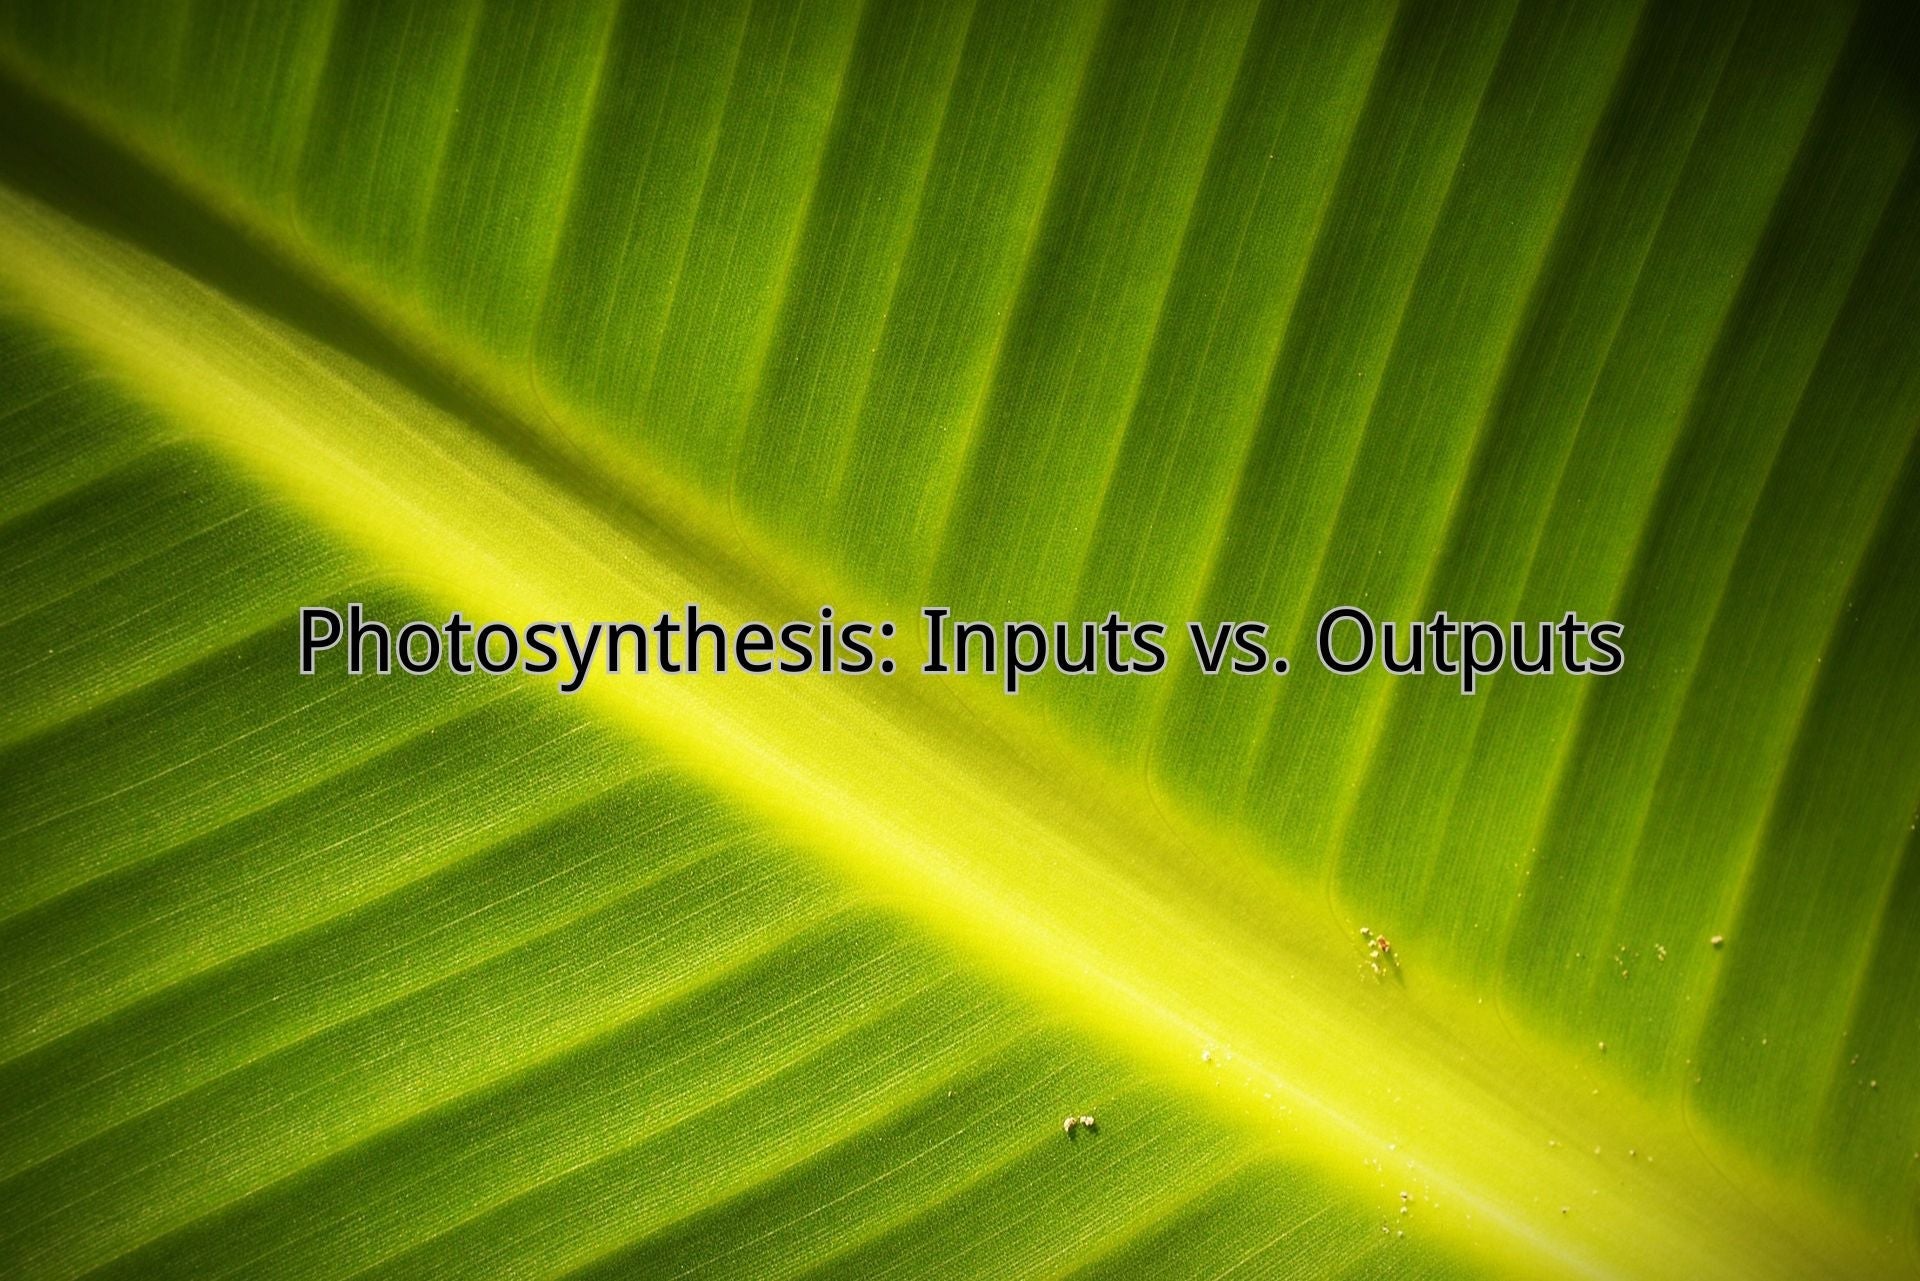 Photosynthesis: Inputs vs. Outputs